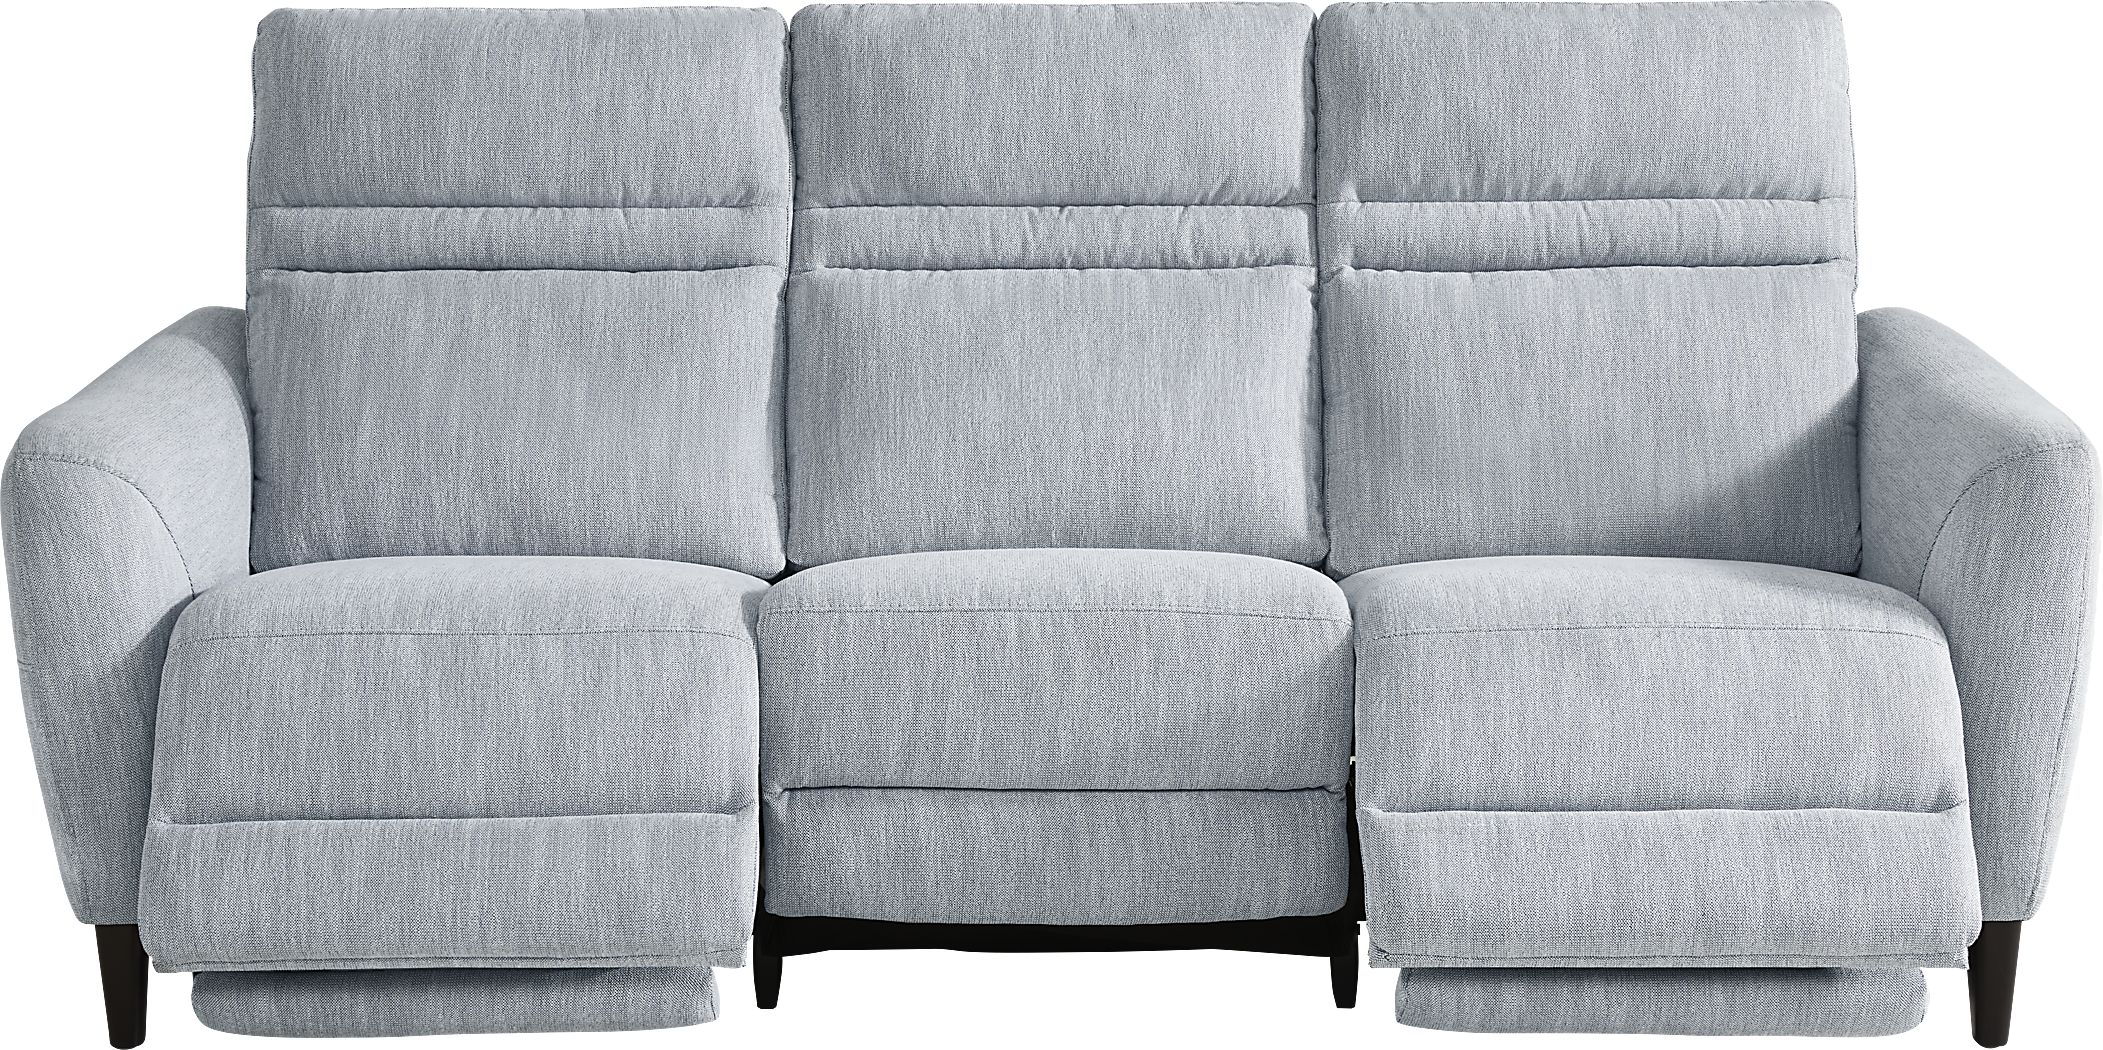 Corby Lane Ocean 6 Pc Living Room with Dual Power Reclining Sofa